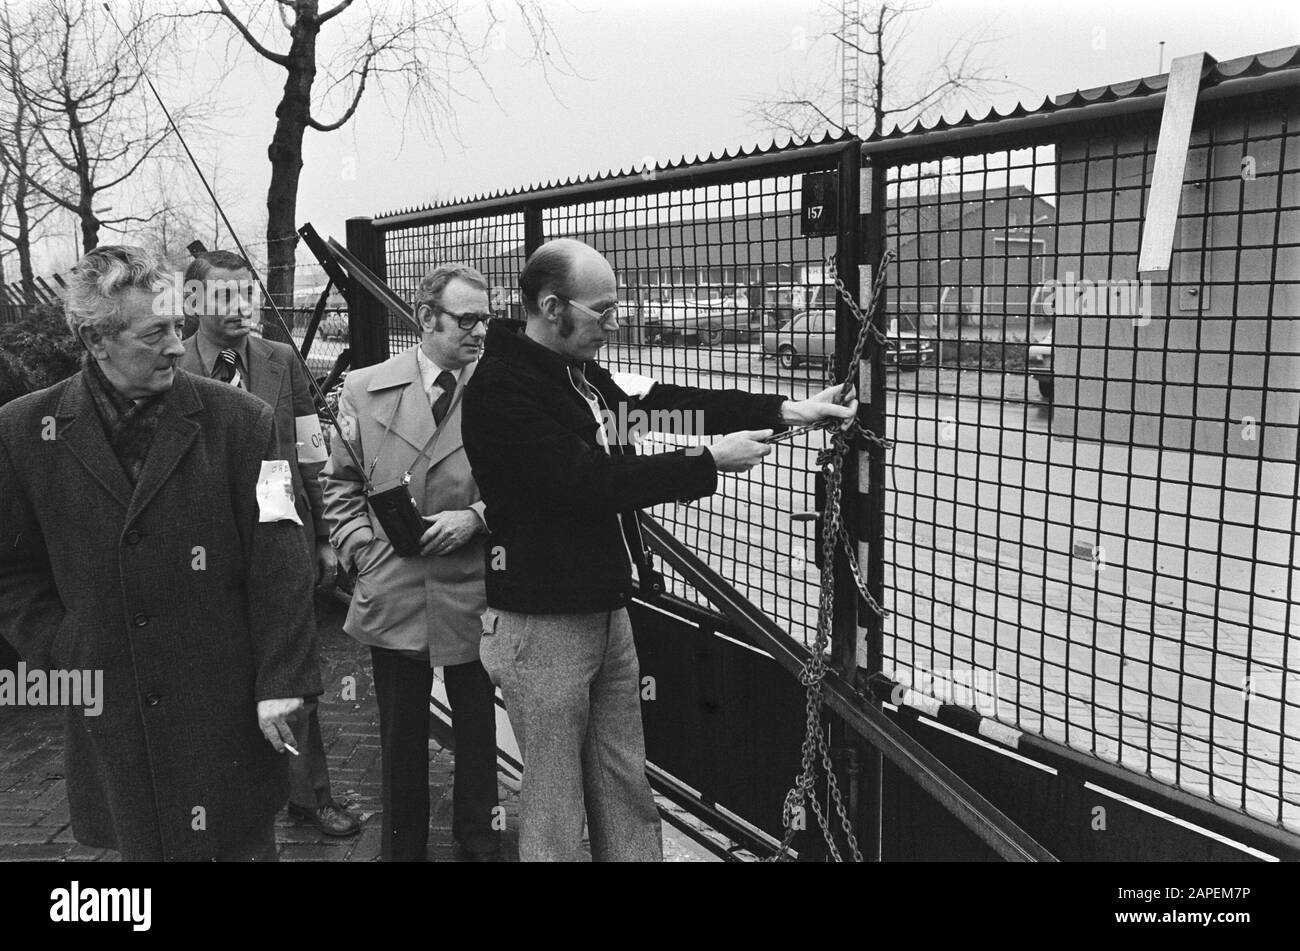 Occupation Tealtronic; after the appearance of a bailiff, the gates were closed with large chains Date: January 10, 1977 Keywords: occupancy, PORTS Stock Photo